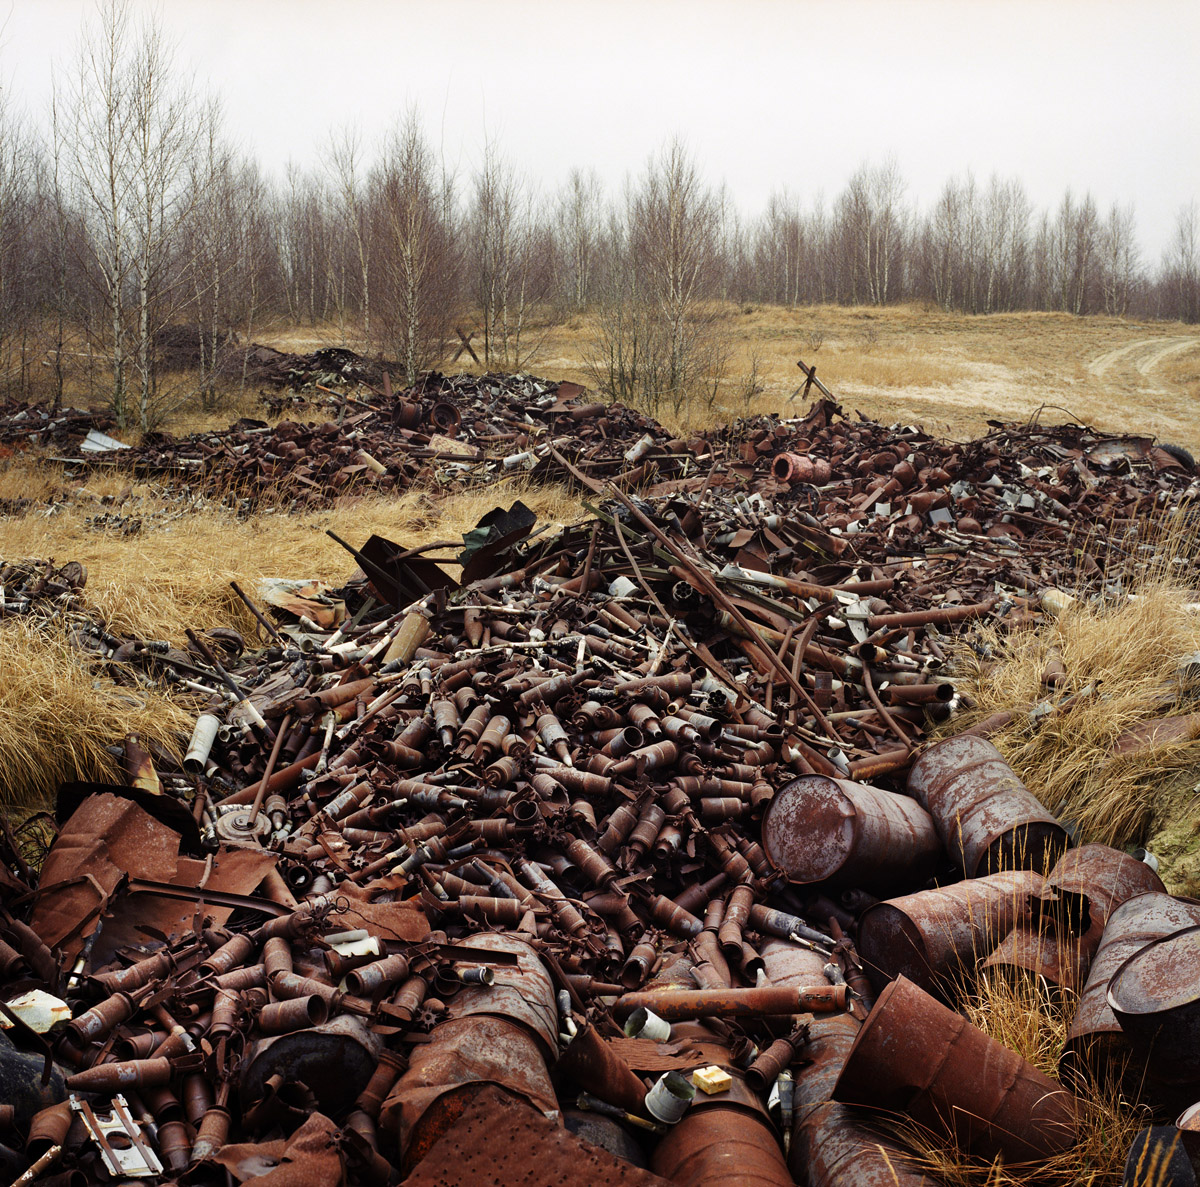 PRESS PHOTO ONLY TO BE USED IN RELATION WITH EXHIBITION RELICS OF THE COLD WAR IN DHM, BERLIN 2016. CUTTING PICTURES IS NOT ALLOWED. GERMANY, Germany east, Lieberose Left behind ammunition on former exercise terrain of the Soviet army. Photo: Martin Roemers